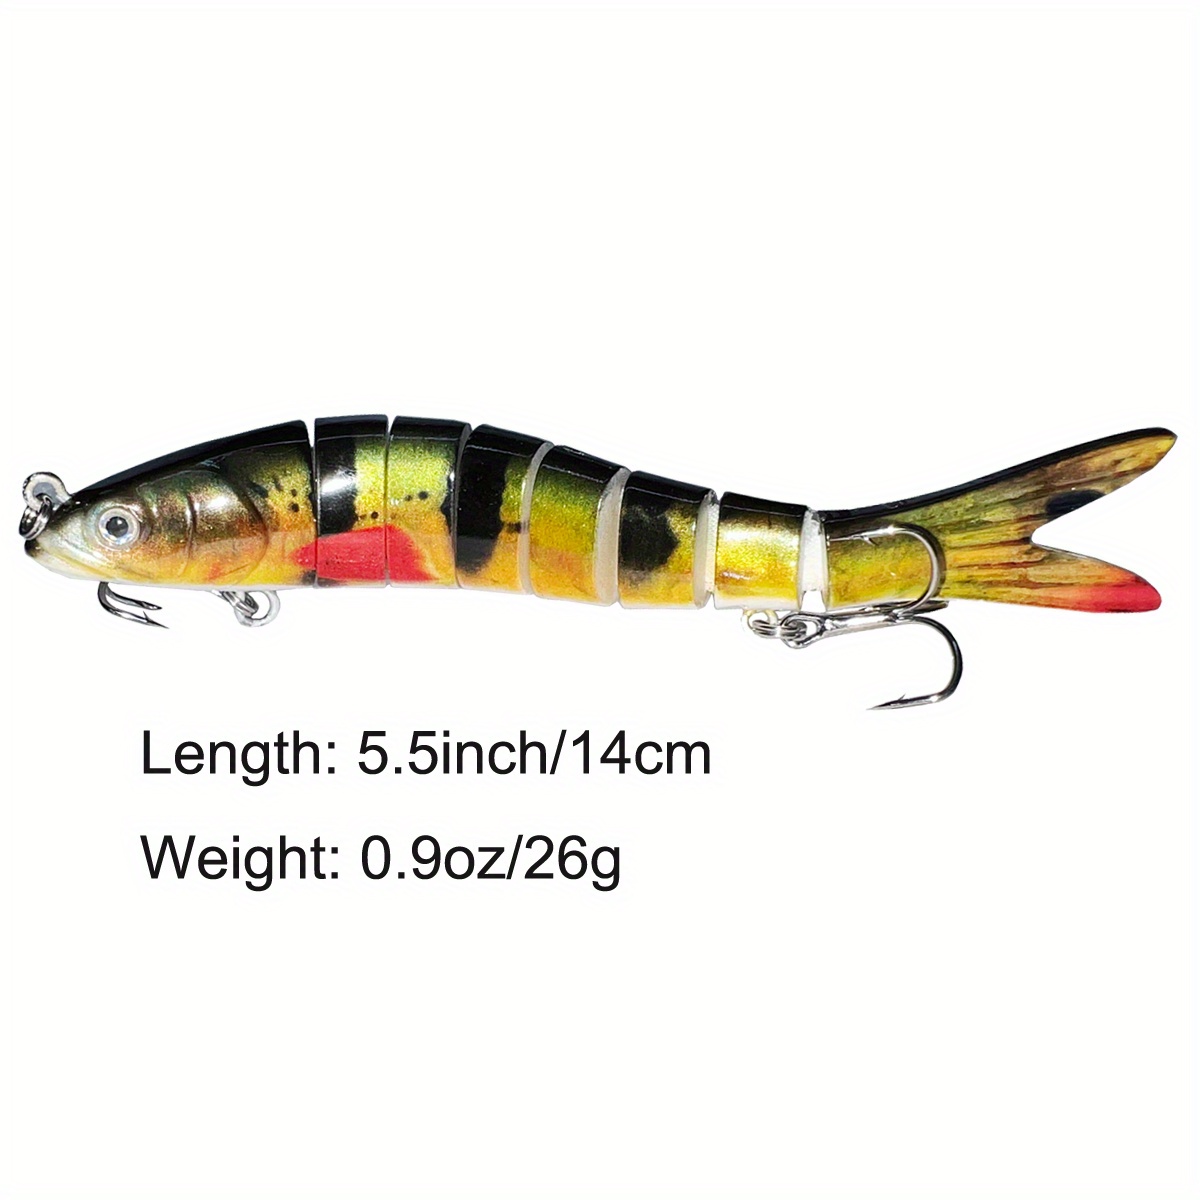 Lifelike Lure Bait Fishing Lures For Bass Trout Perch Jointed Swimbait Hard Bait  Freshwater – the best products in the Joom Geek online store